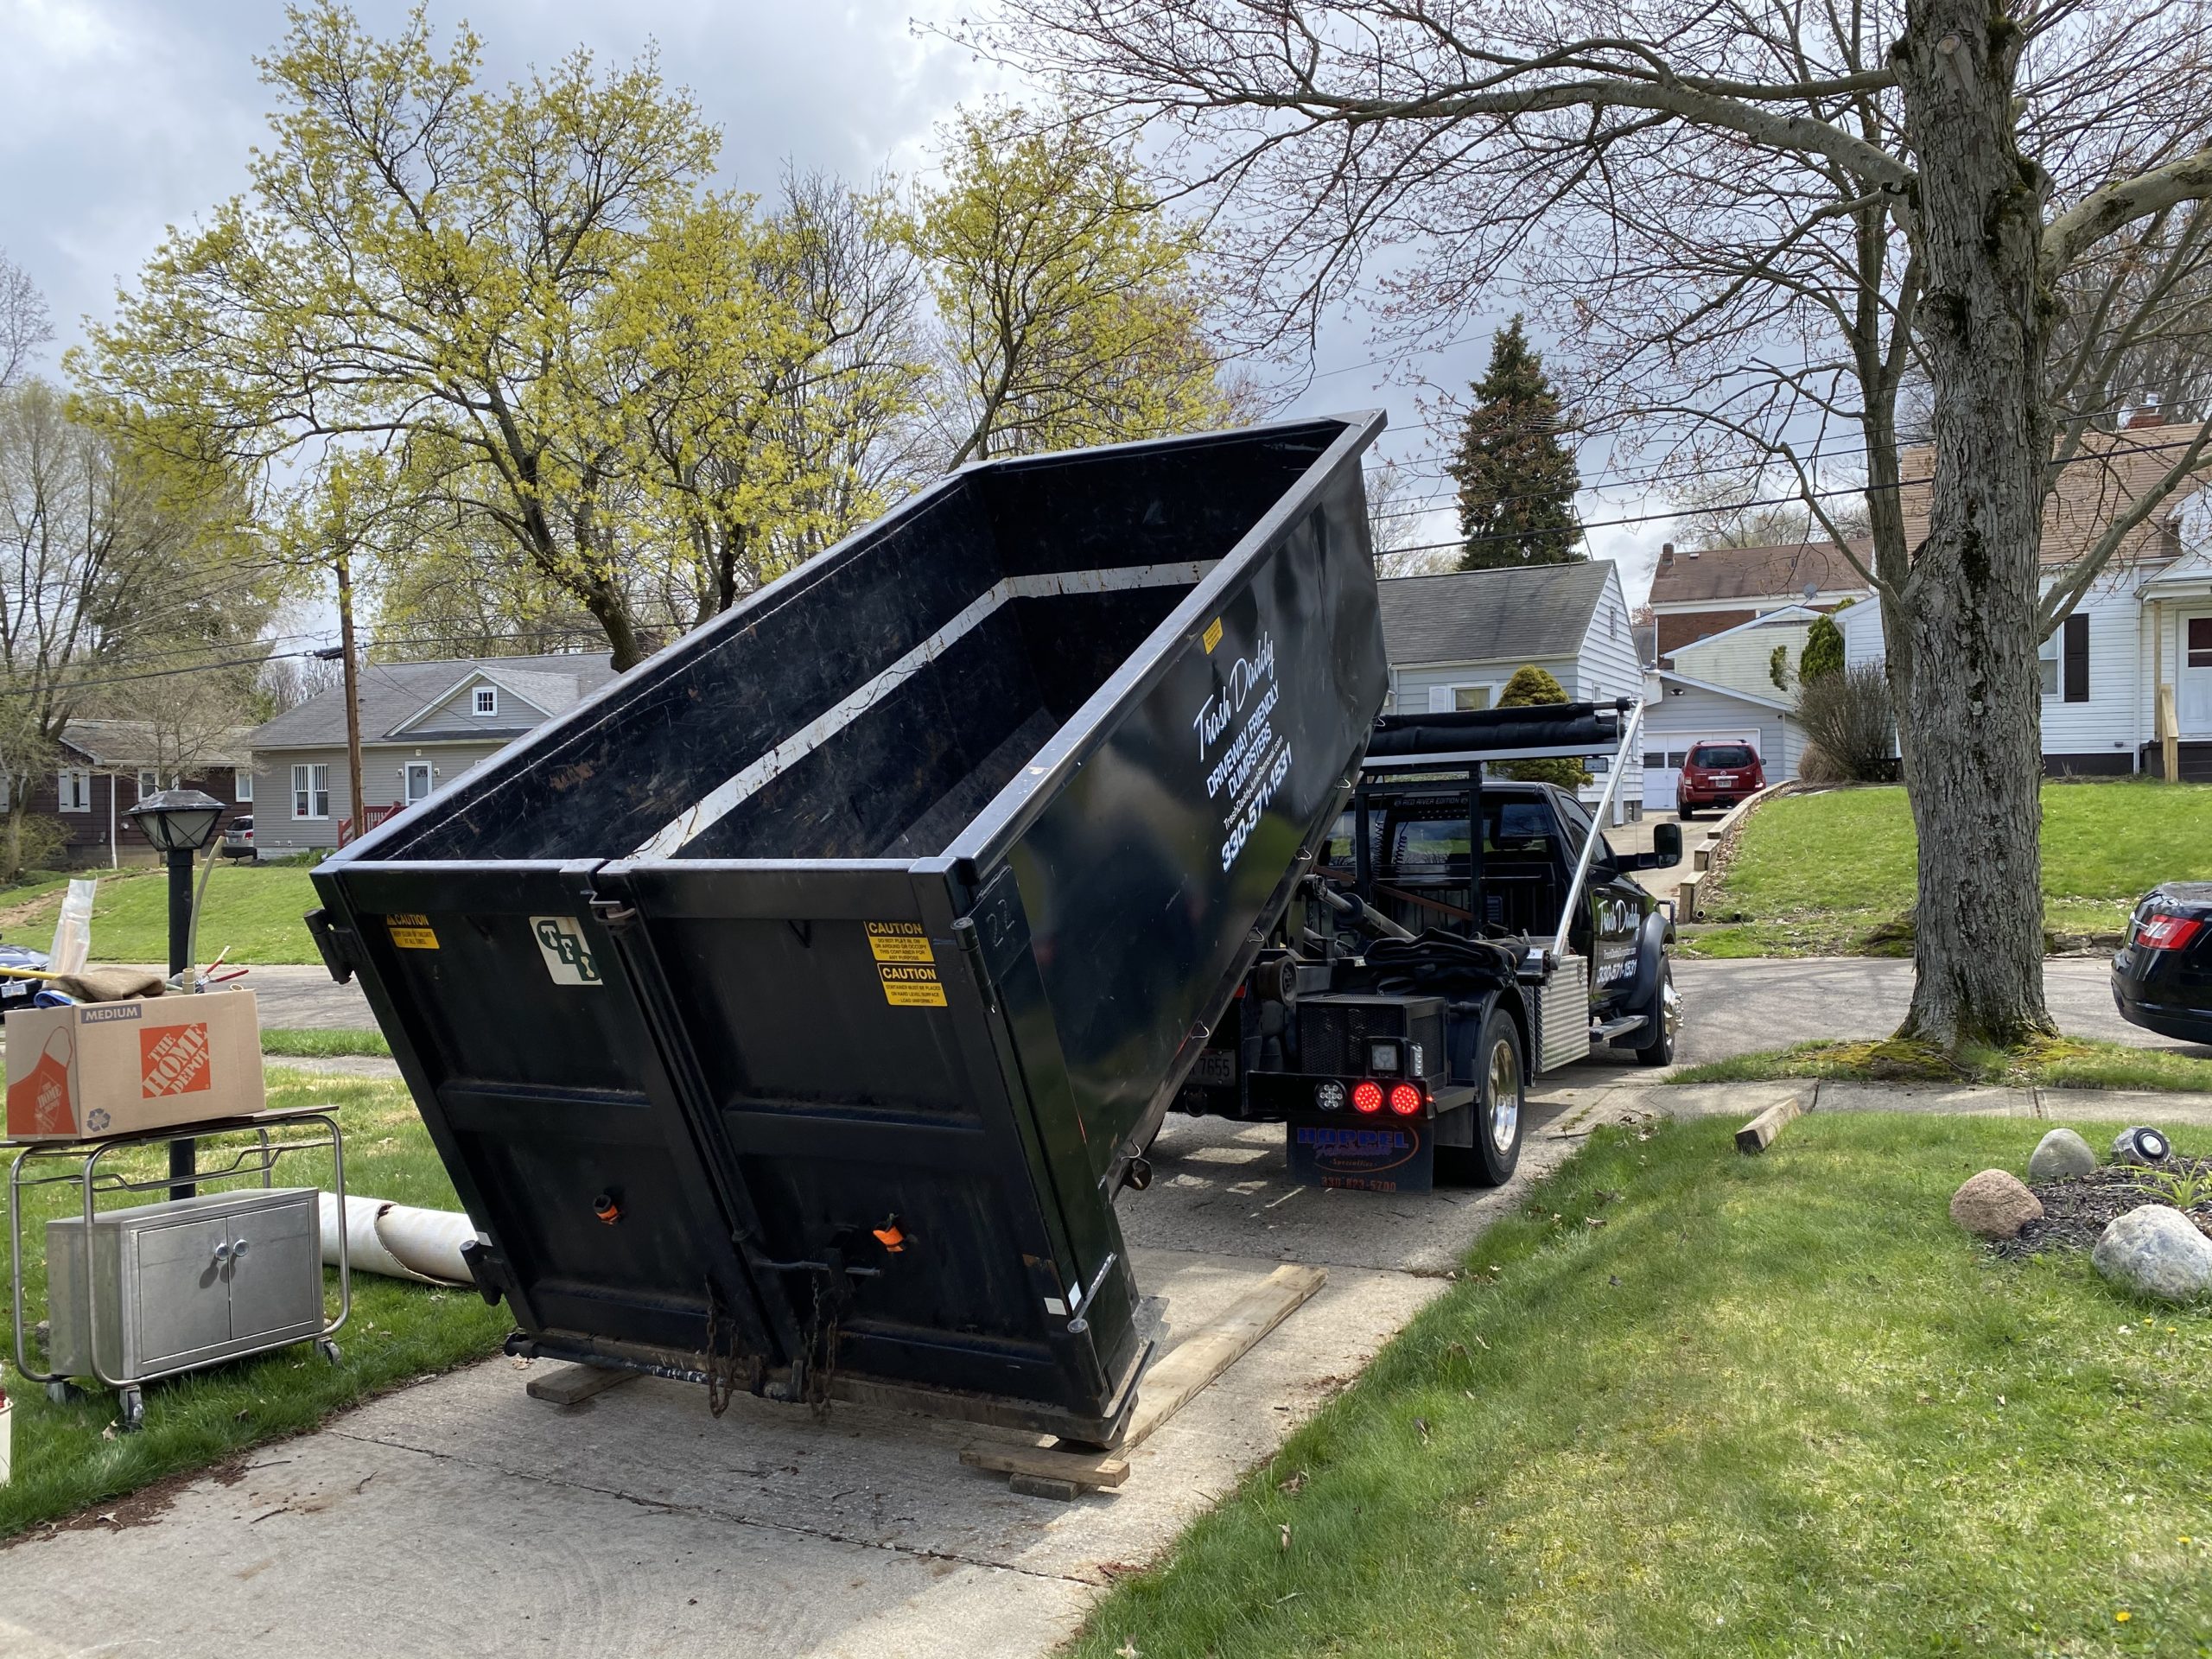 Driveway Friendly Dumpster Being Placed on Planks